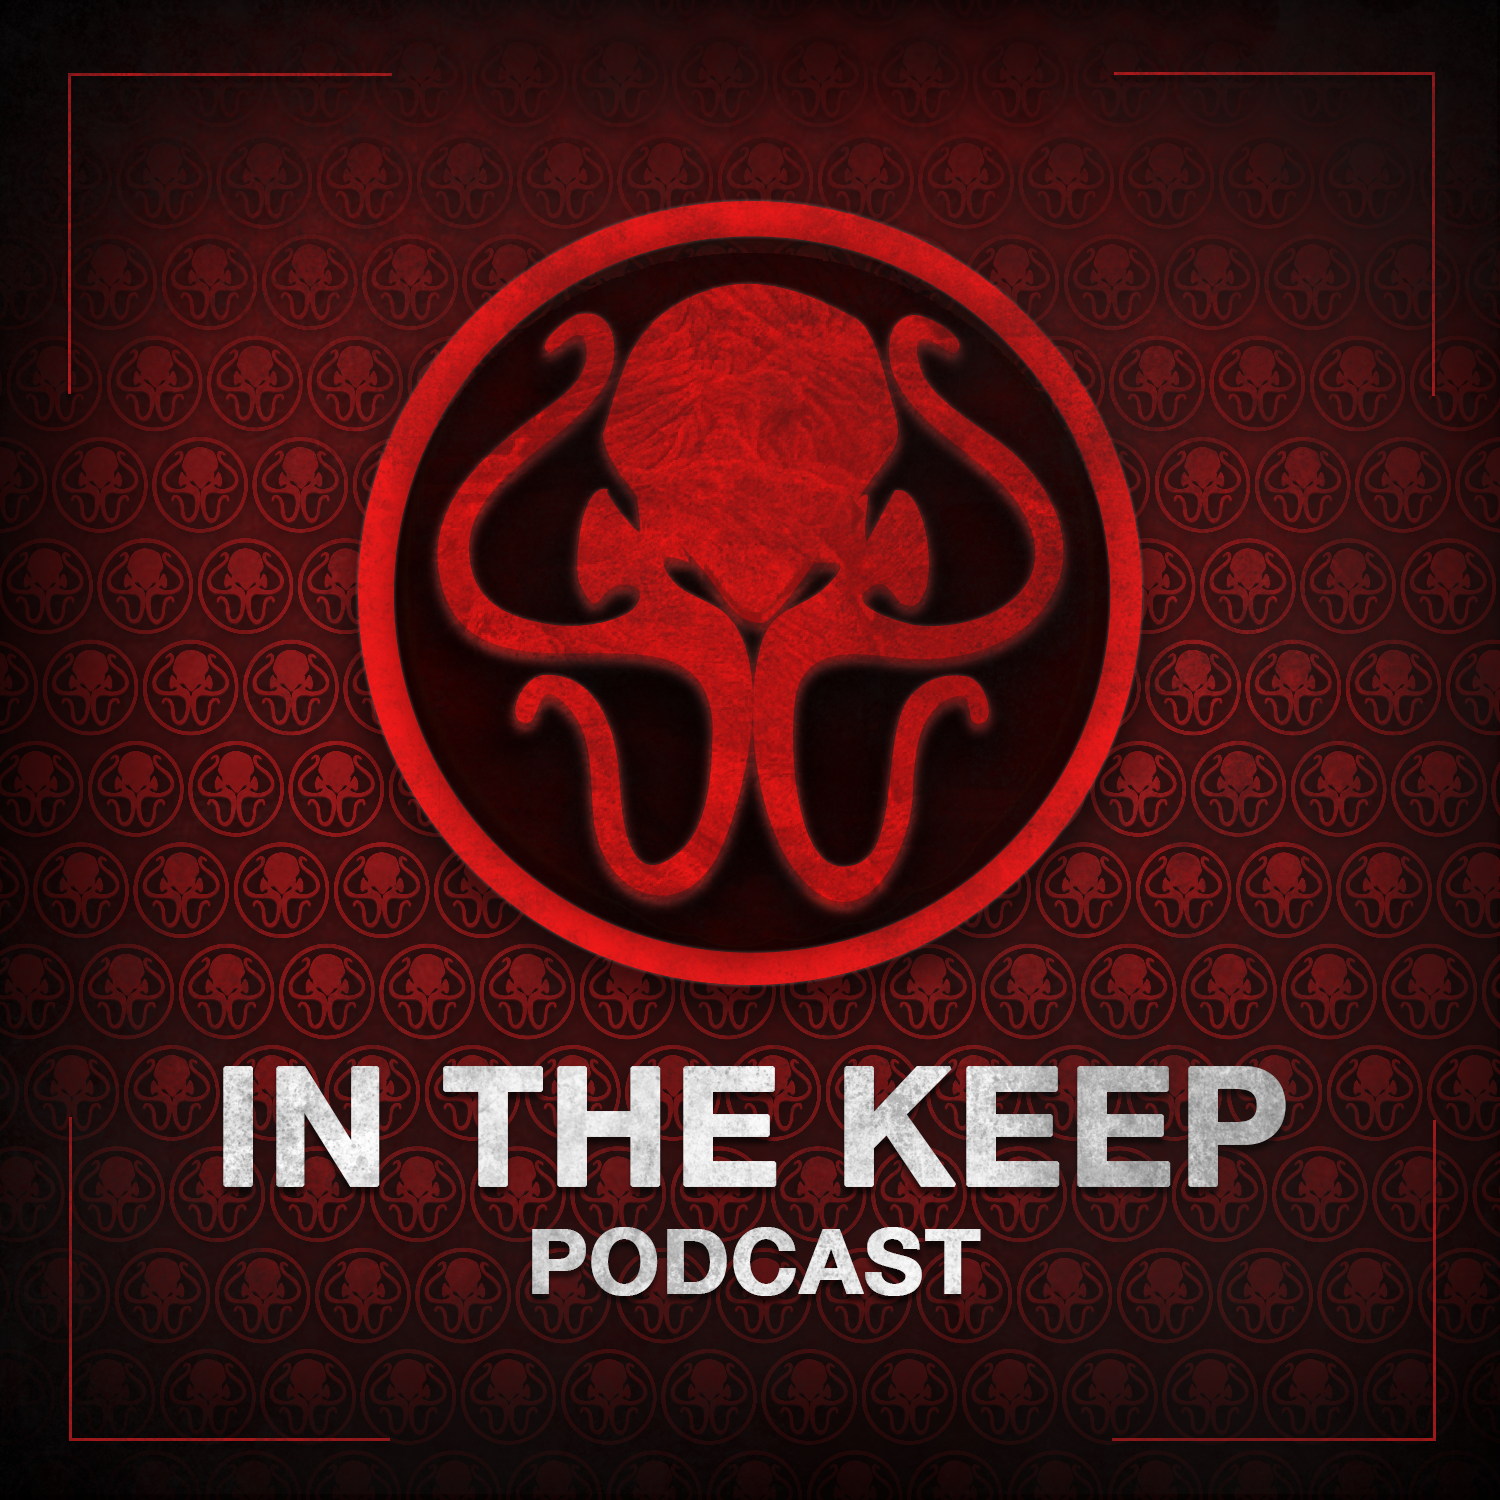 In The Keep Podcast – #73 StarlightSkyes (Dread XP)